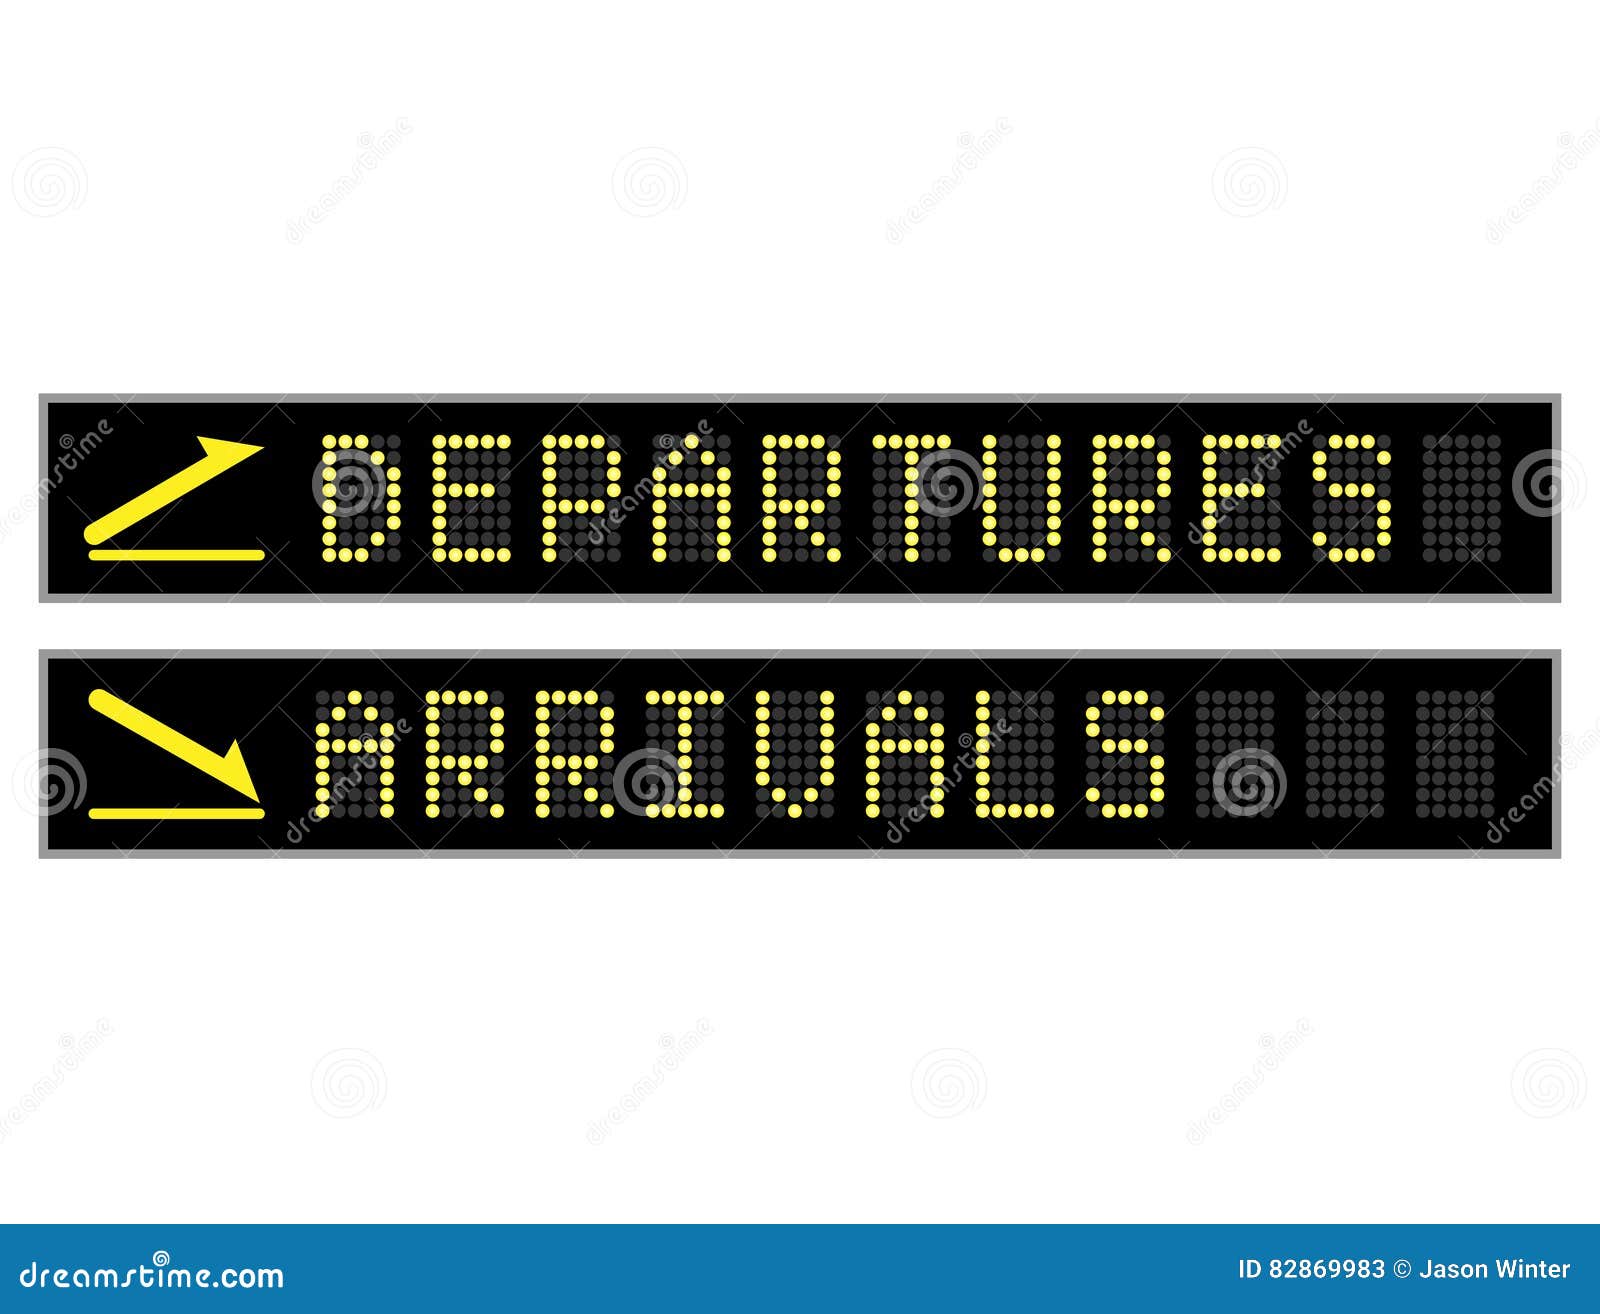 Departures Arrivals Led Signs Stock Vector - Illustration of airport: